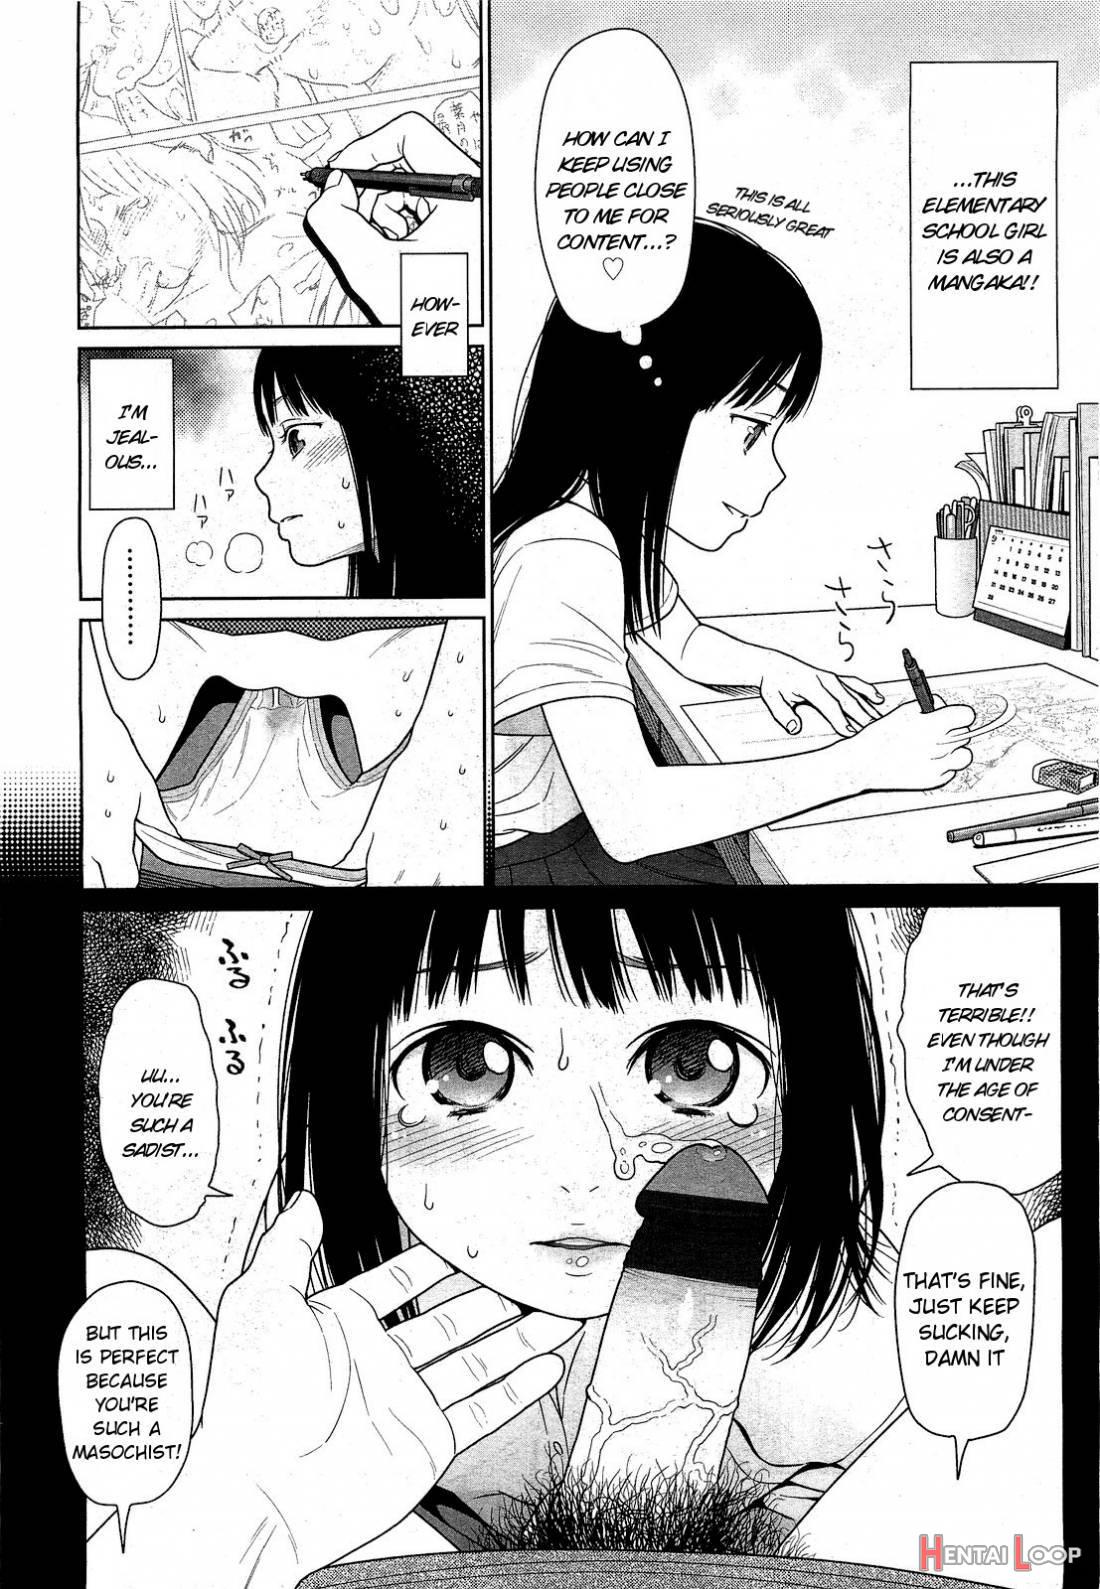 Japanese Preteen Suite page 230